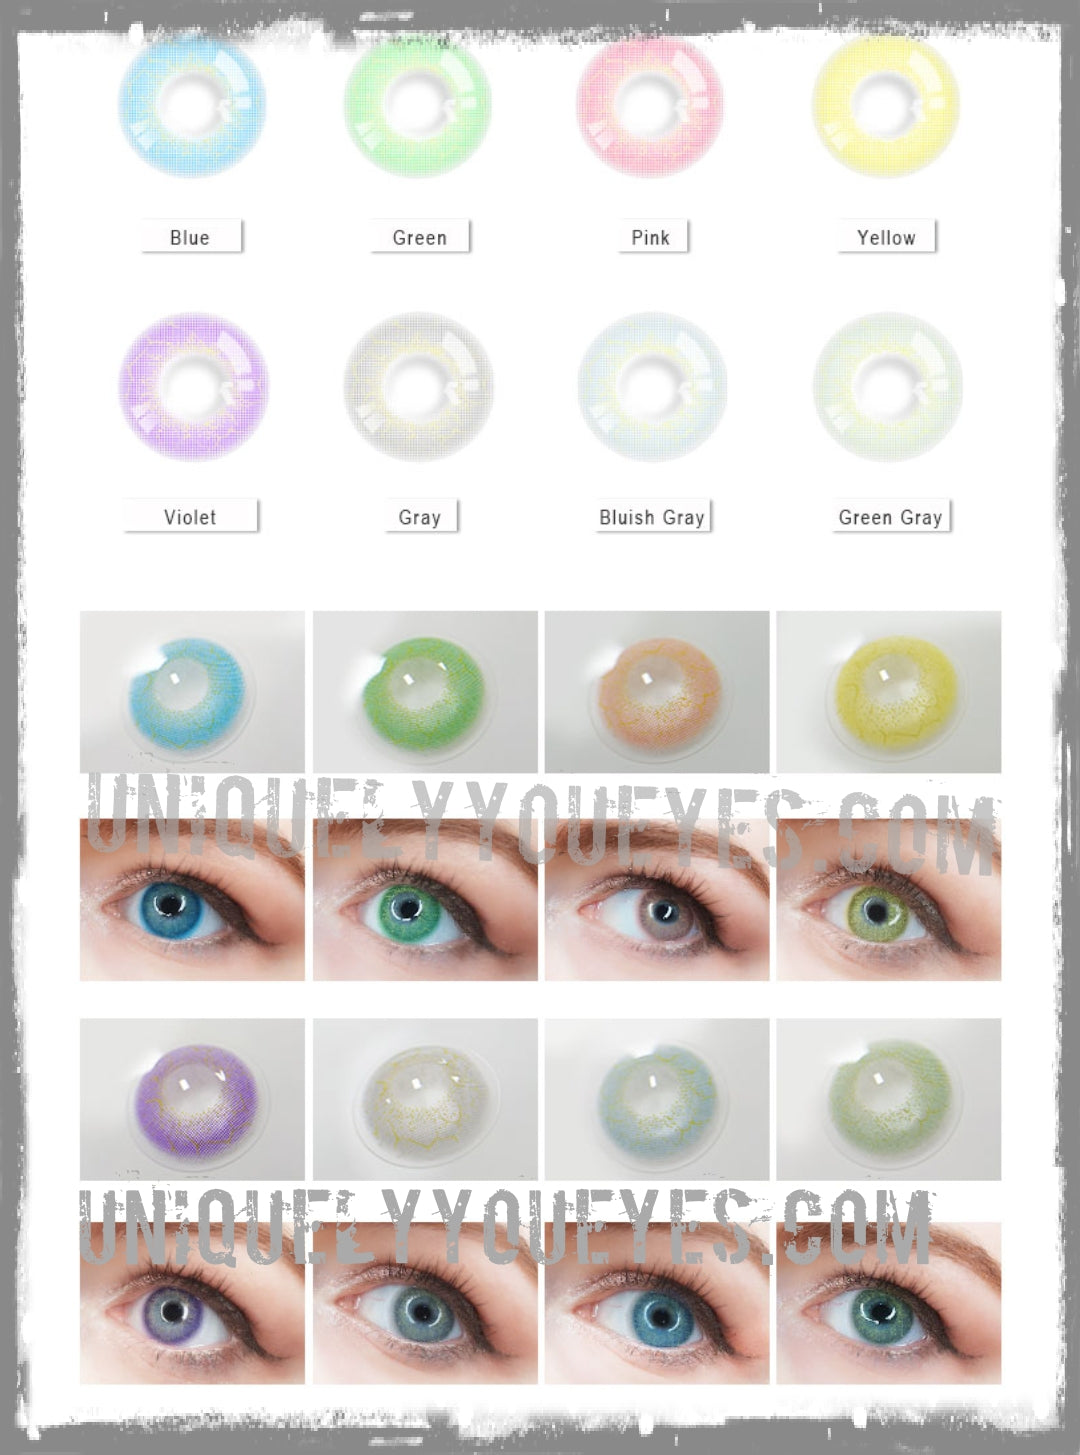 ELECTRICALLY NATURAL PINK CURRENT COLORED CONTACT LENS GOSSIP GIRL-GOSSIP GIRL-UNIQUELY-YOU-EYES